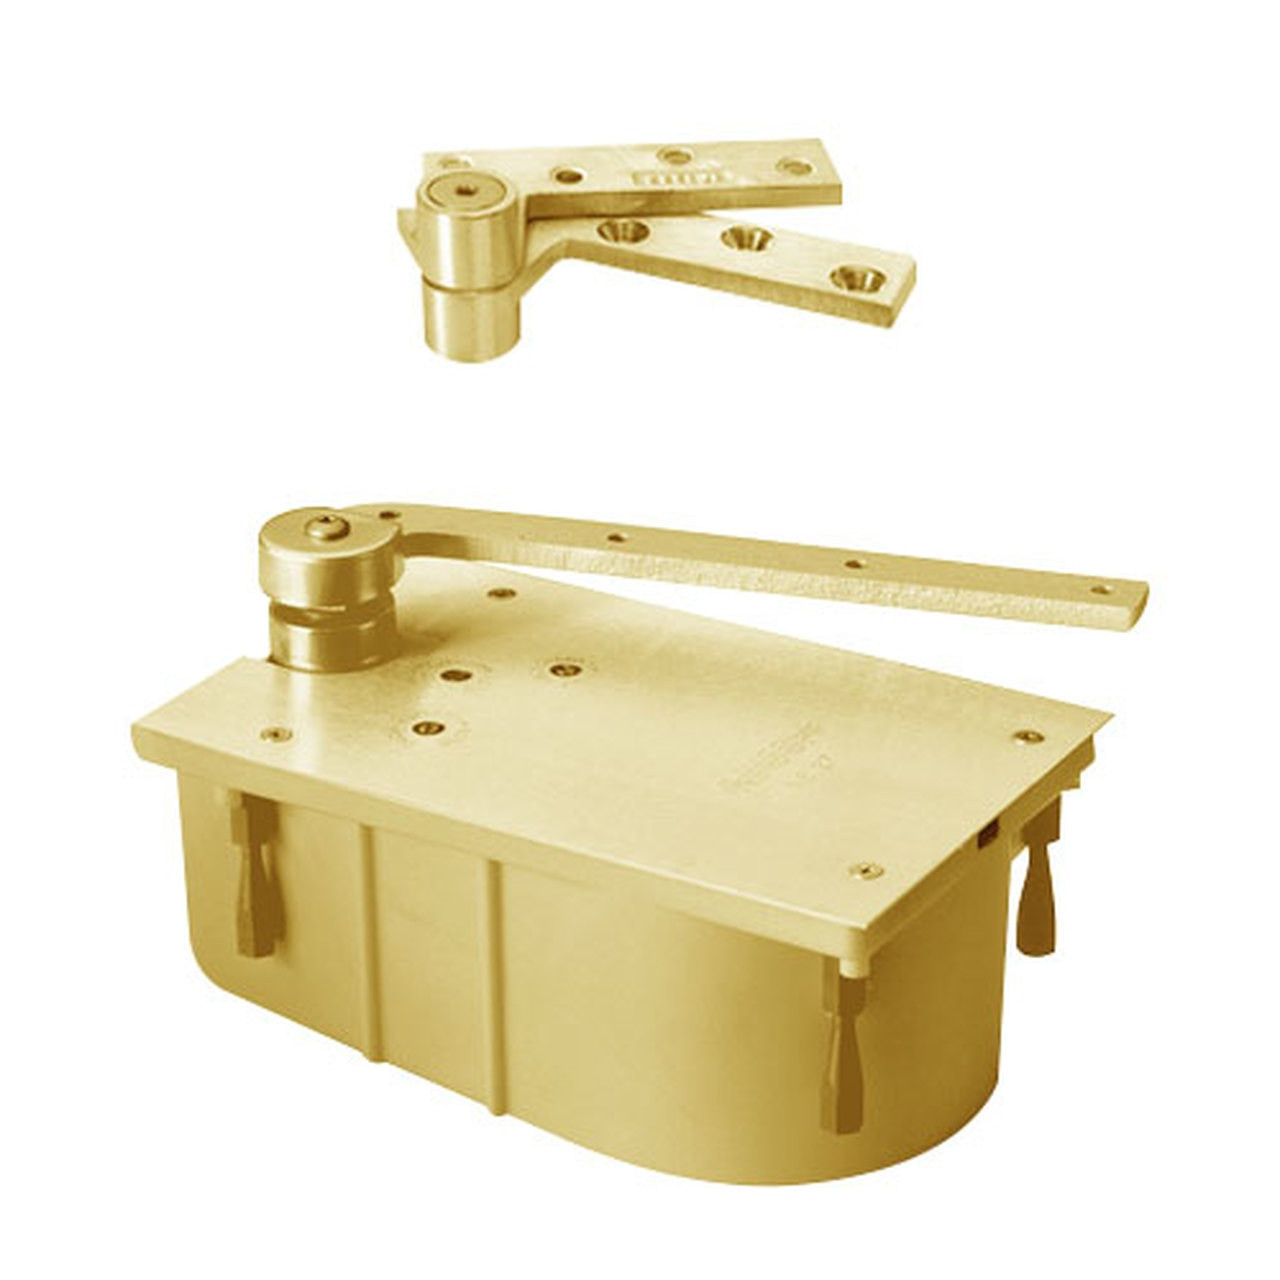 F127-90N-LFP-LCC-RH-606 Rixson 27 Series Fire Rated Heavy Duty 3/4" Offset Hung Floor Closer in Satin Brass Finish